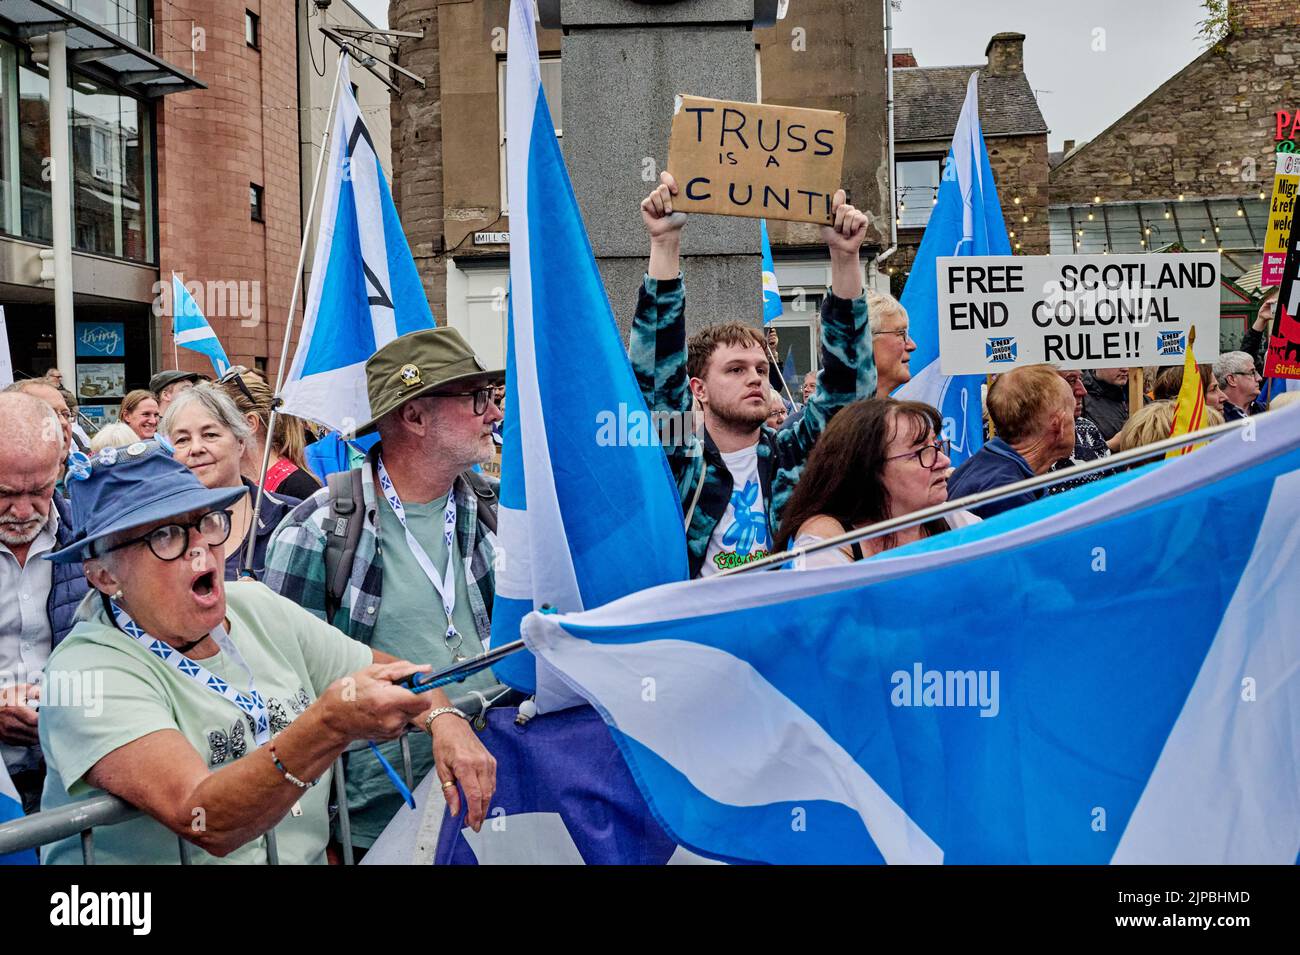 Perth Scotland, UK 16 August 2022. Protesters for a variety of causes gather outside Perth Concert Hall ahead of the Conservative Hustings that will decide the new Prime Minister. credit sst/alamy live news Stock Photo